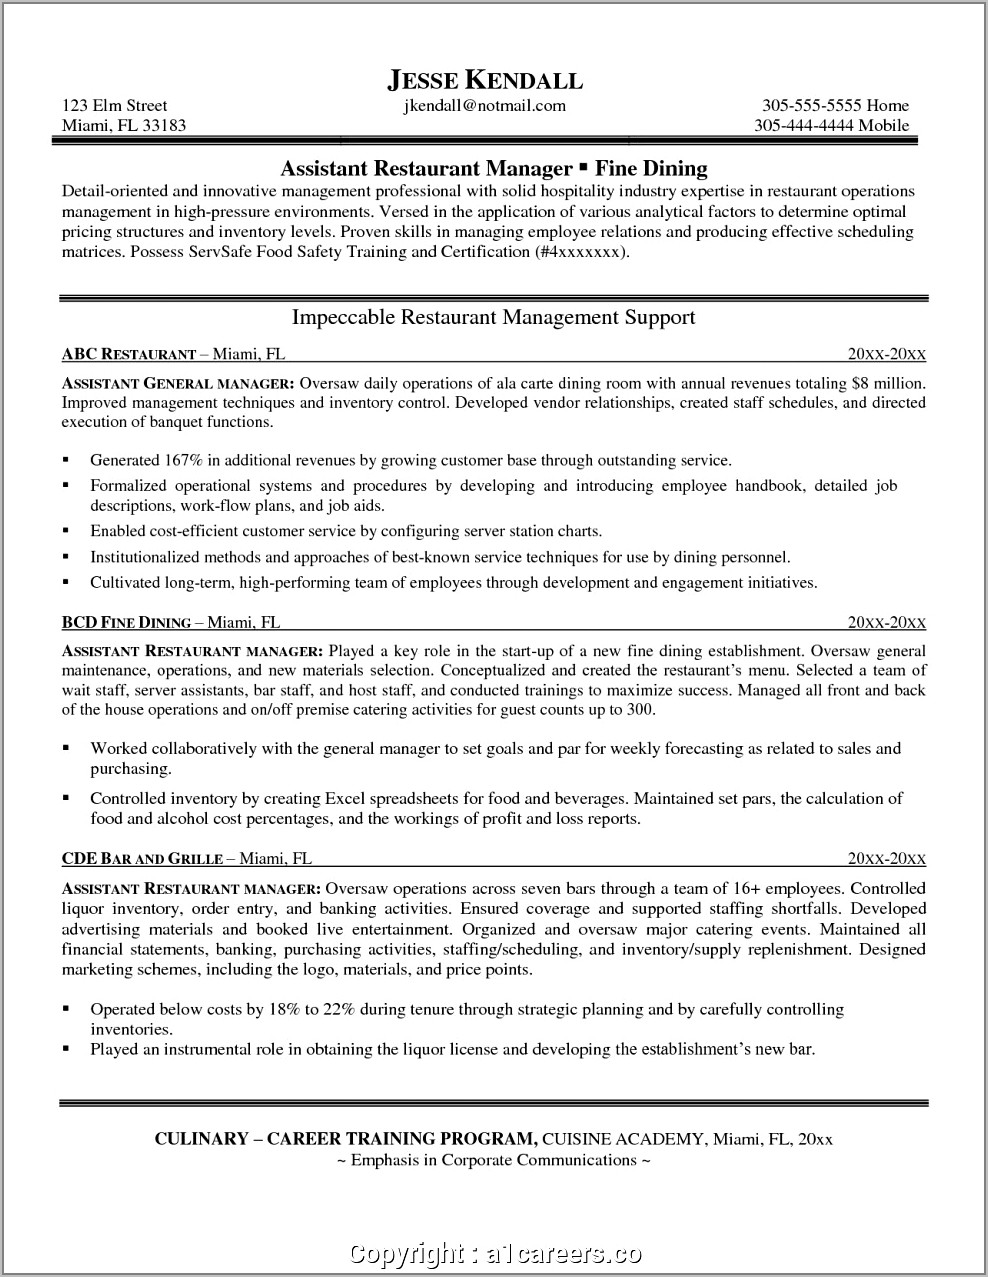 Resume For House Manager